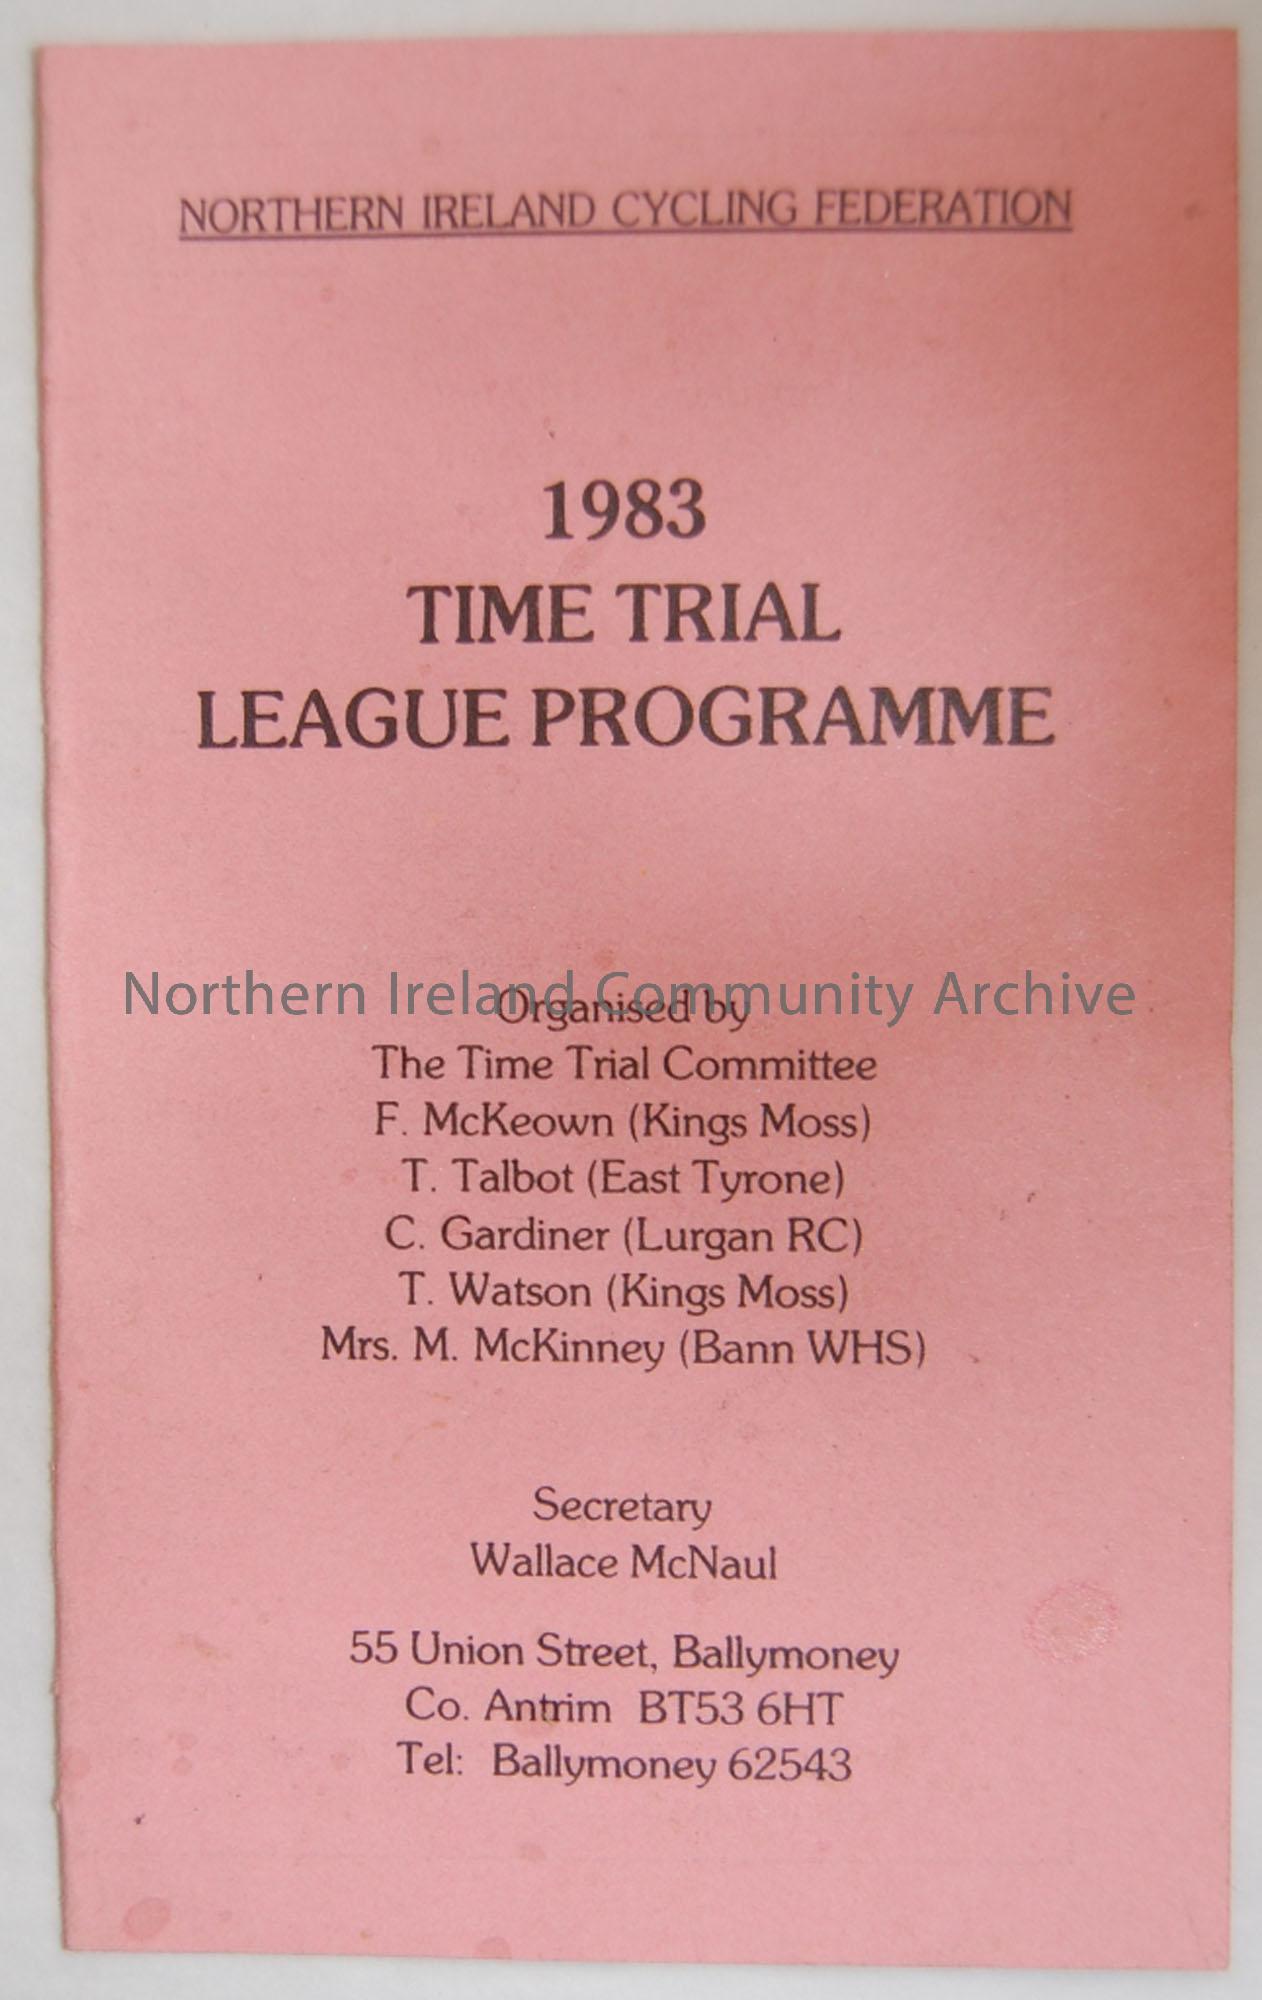 Northern Ireland Cycling Federation 1983 Time Trial league programme.